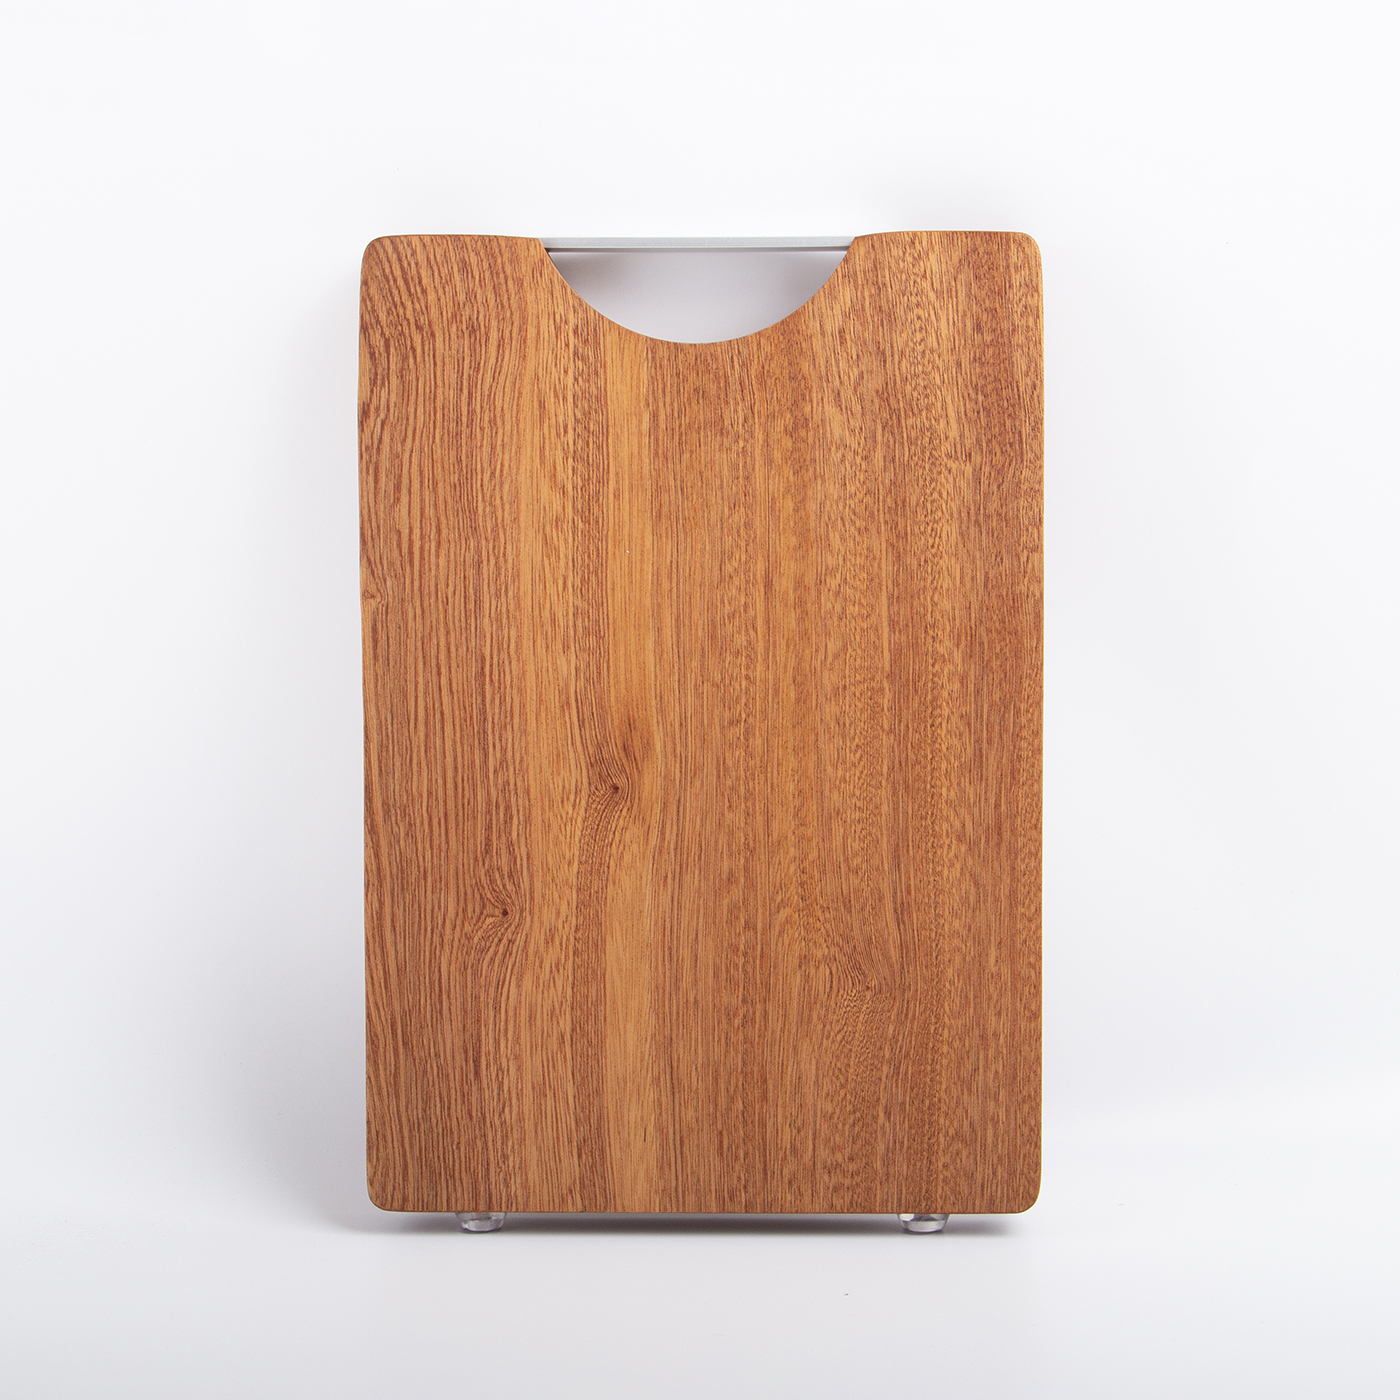 Wooden Cutting Board With Stainless Steel Handle2